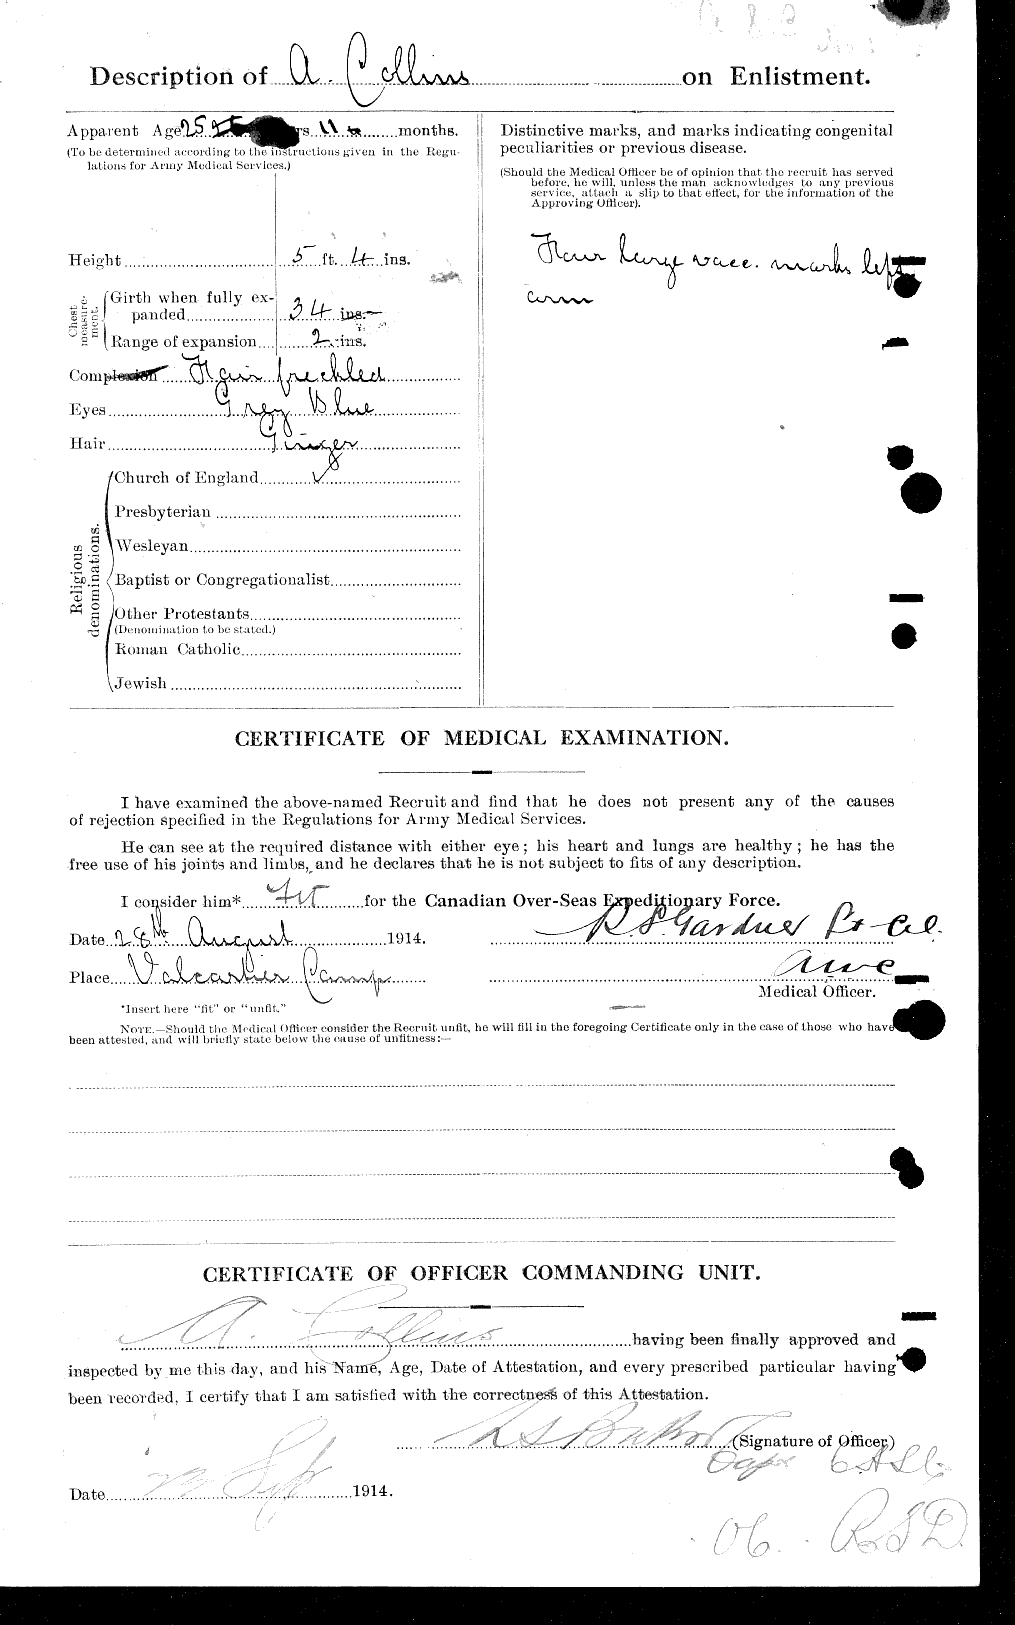 Personnel Records of the First World War - CEF 028985b